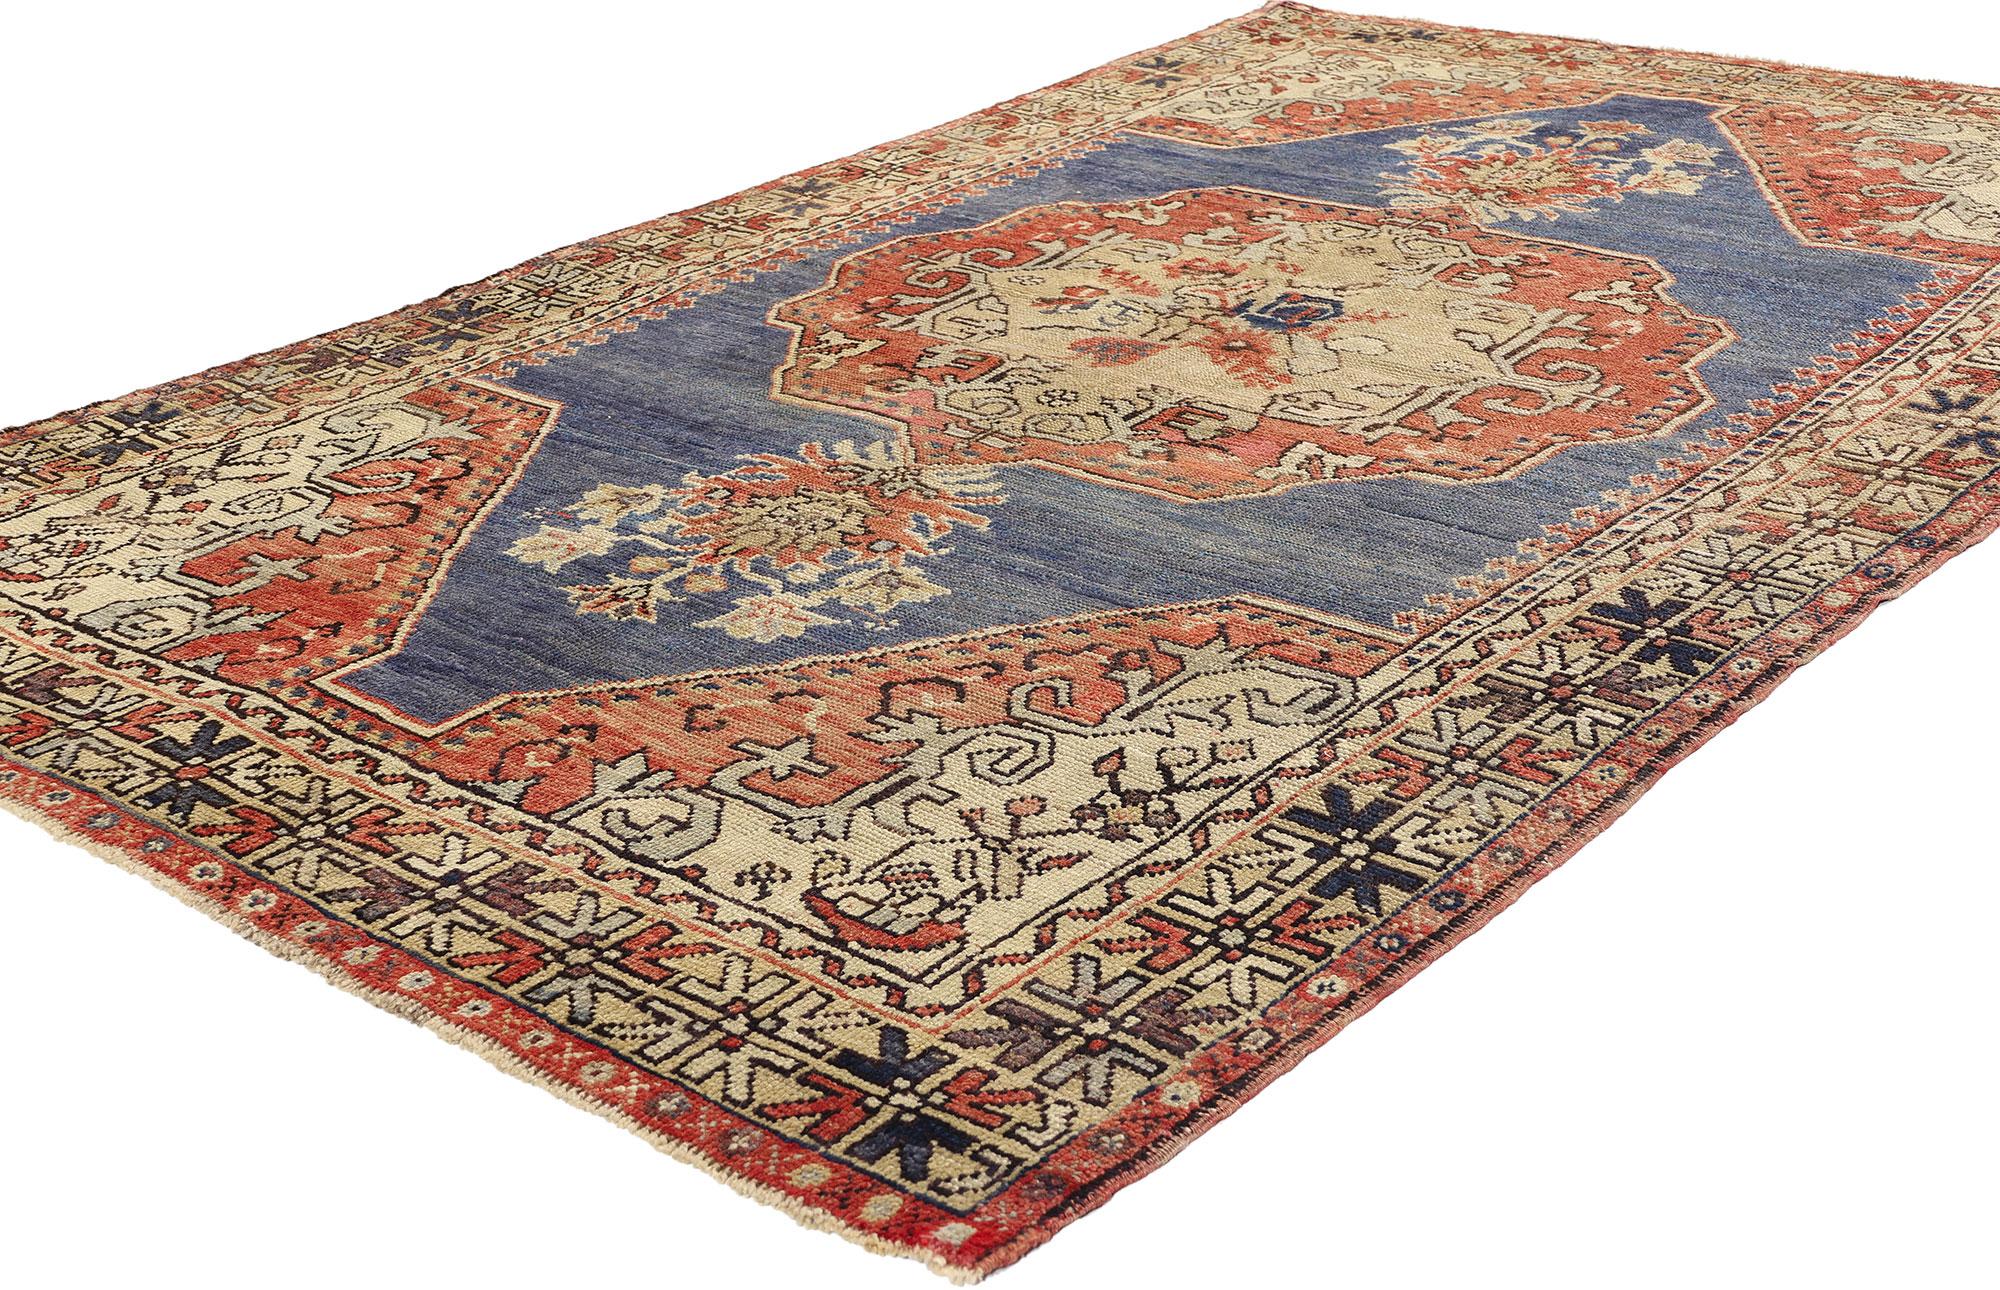 52256 Vintage Blue Turkish Oushak Rug, 04’07 x 07’06. Combining elements of Modern Rustic style with a sense of relaxed refinement, this hand-knotted wool vintage Turkish Oushak rug exudes a timeless charm. Against a backdrop of richly striated blue